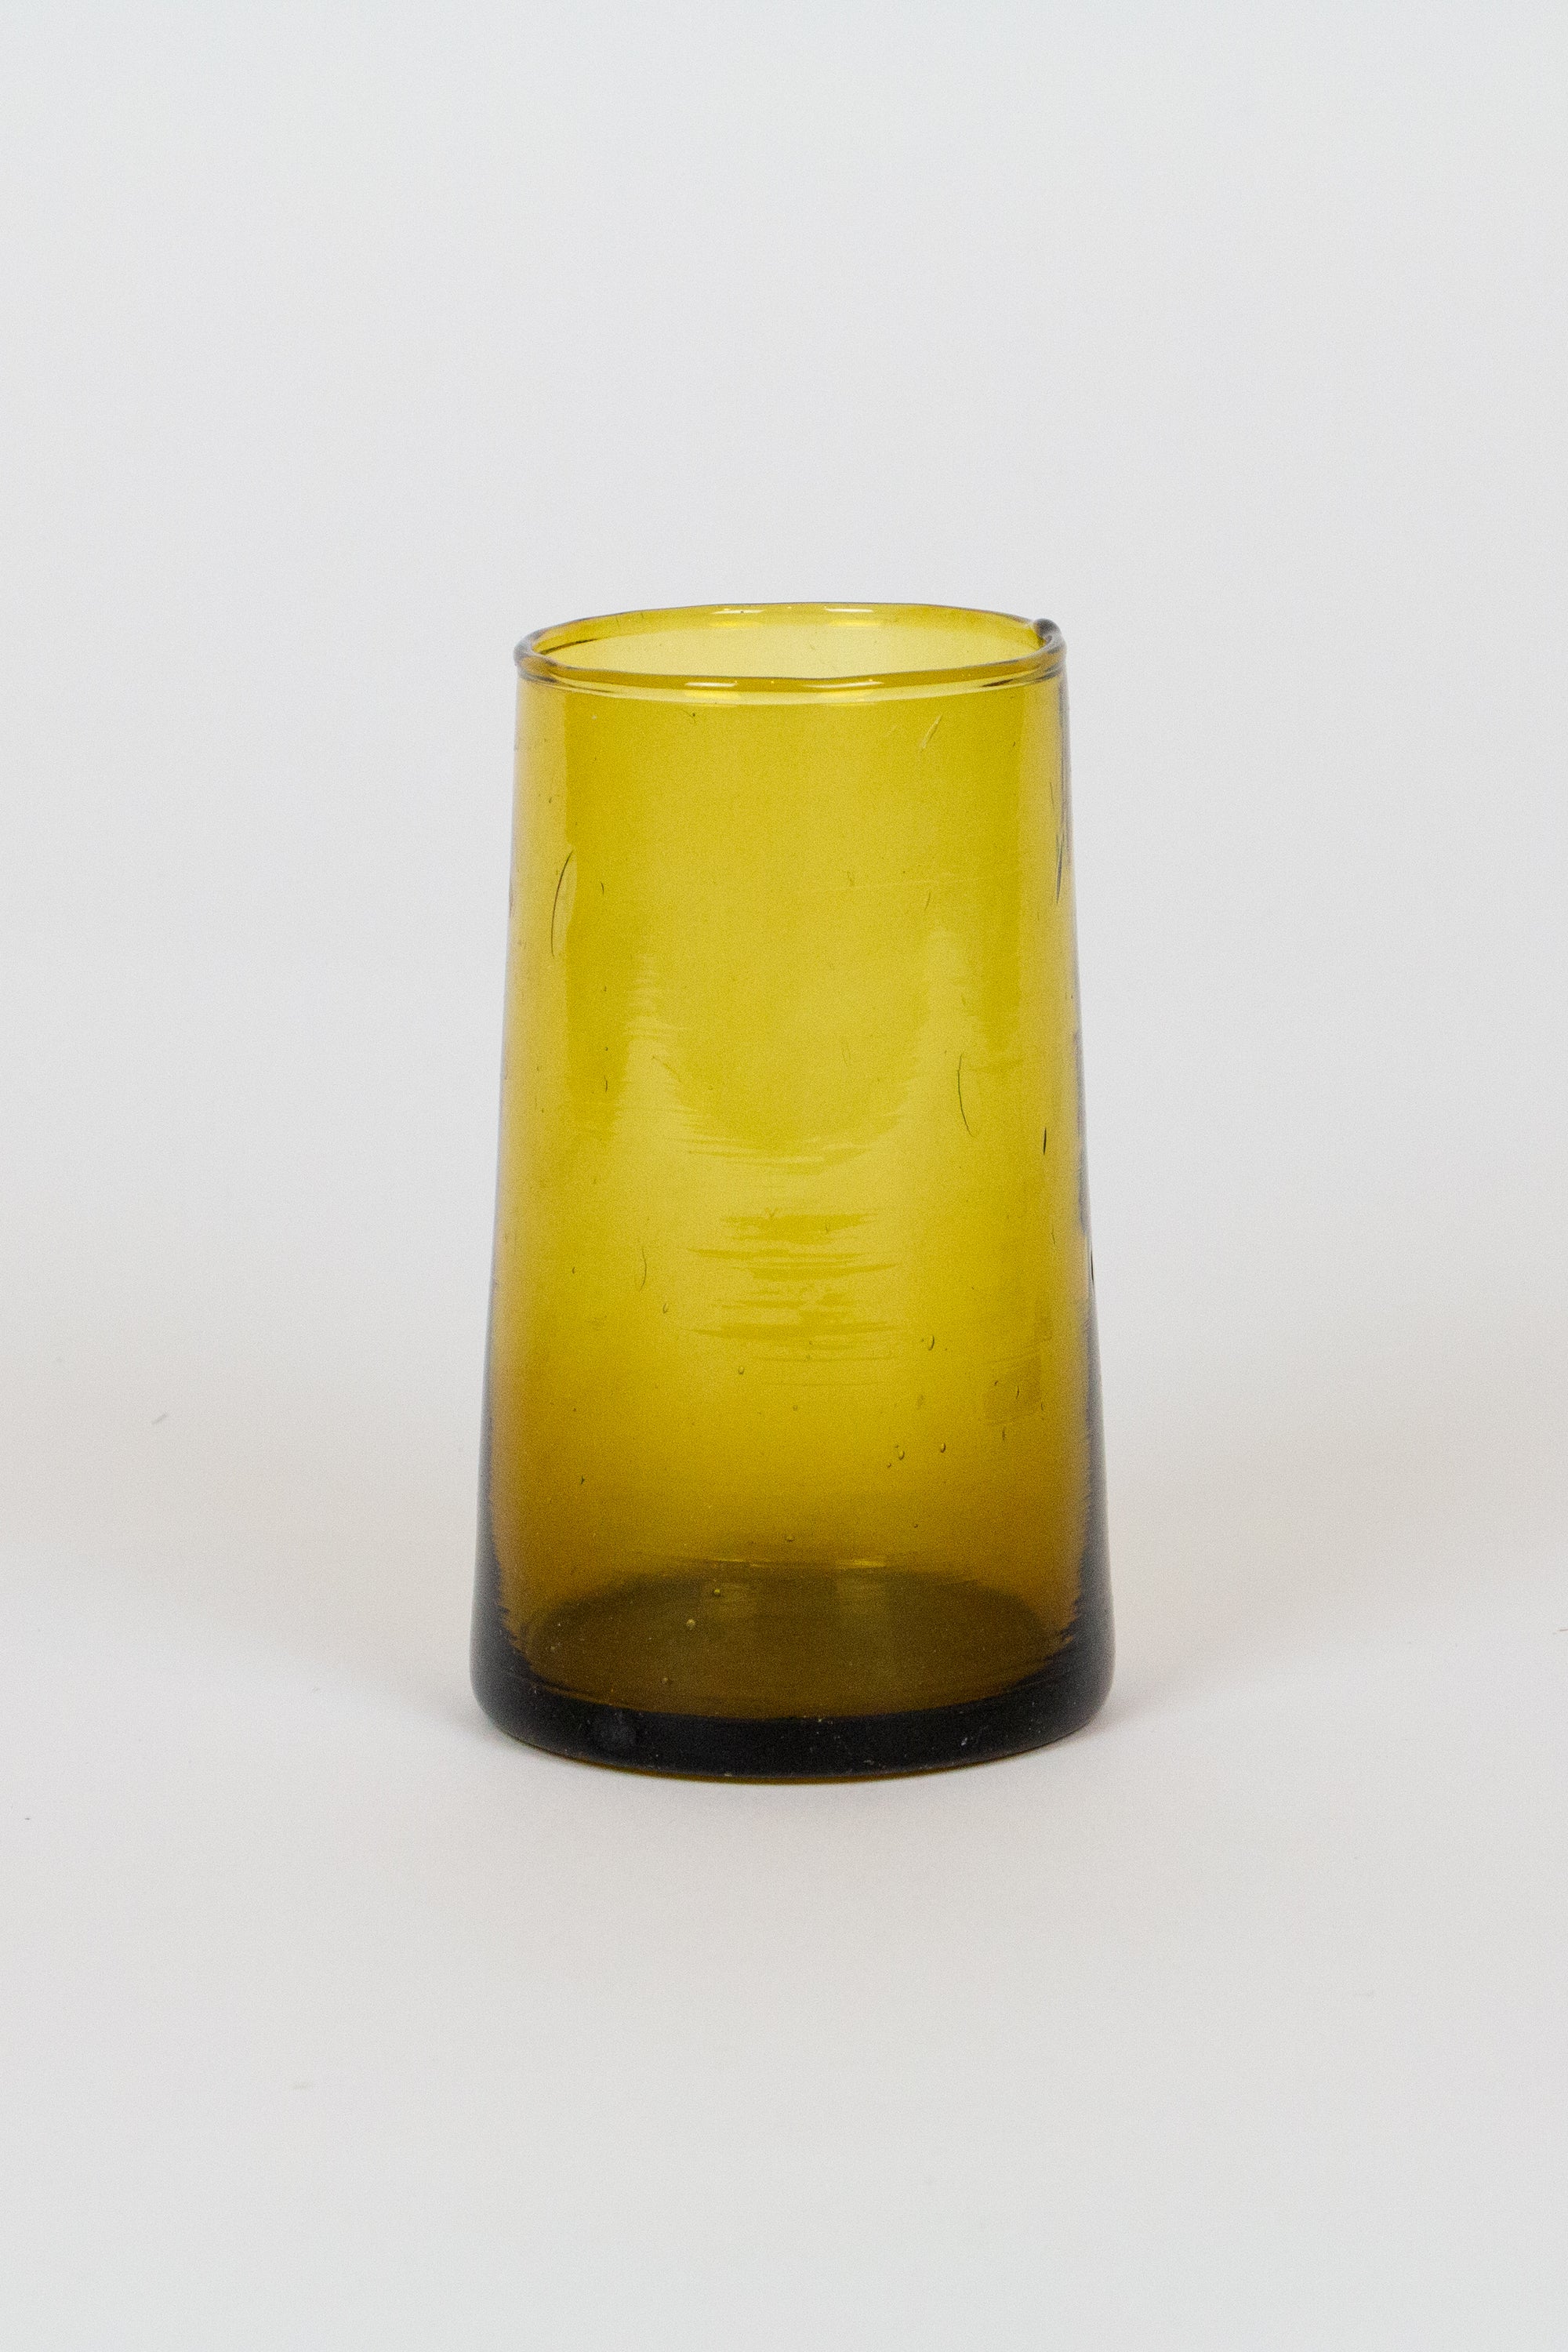 Tall Cone Moroccan Drinking Glasses in Amber, SET OF 6